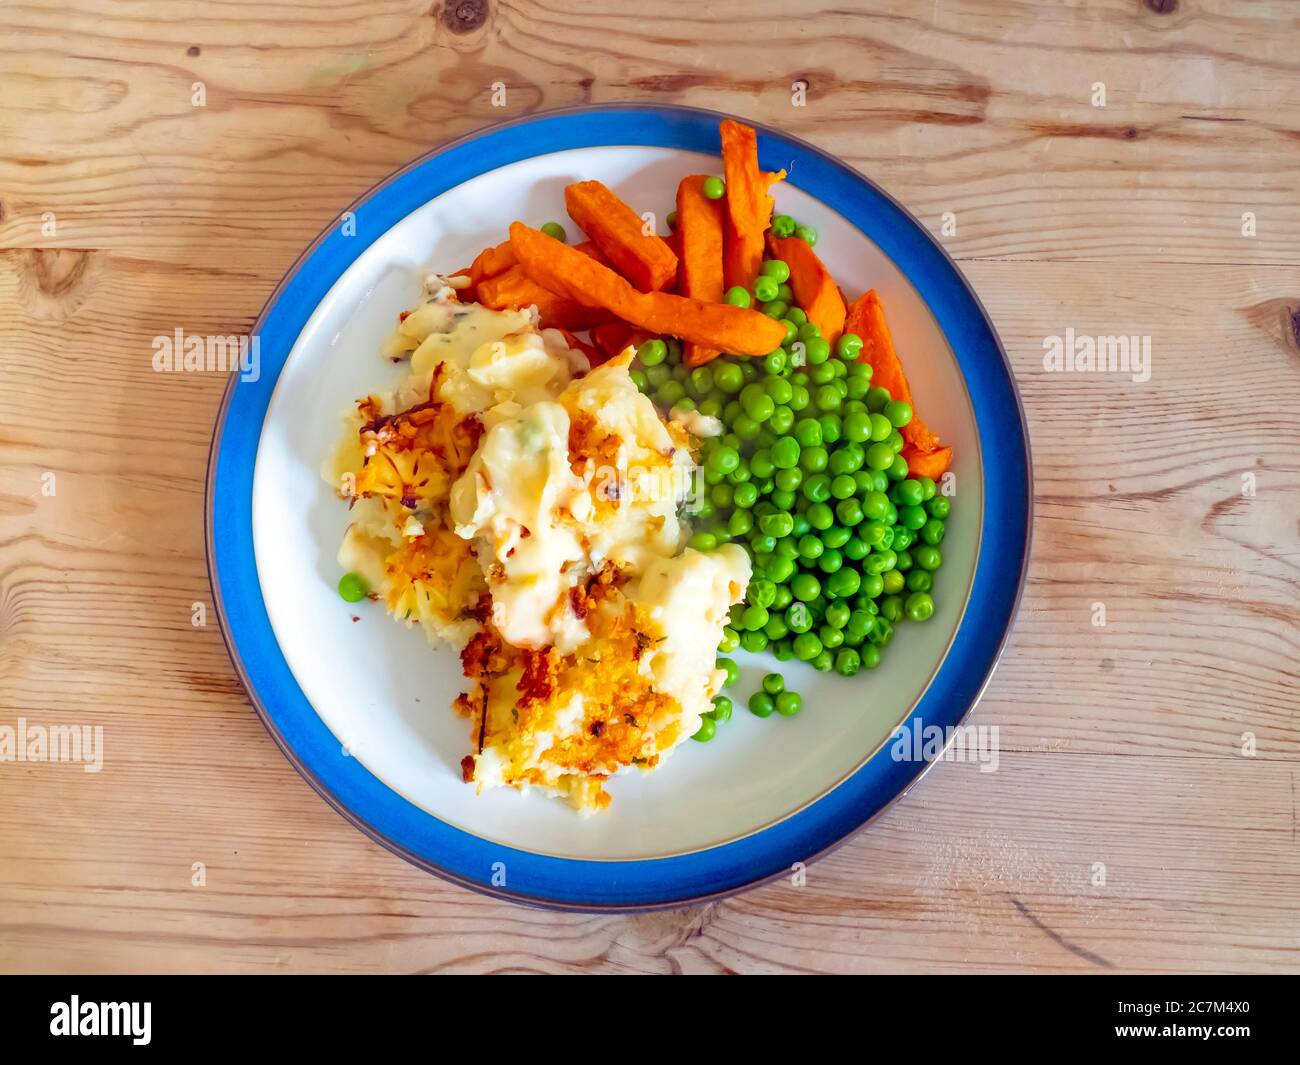 Serving of Fish Pie with garden peas and sweet potato chips on a wooden topped table Stock Photo